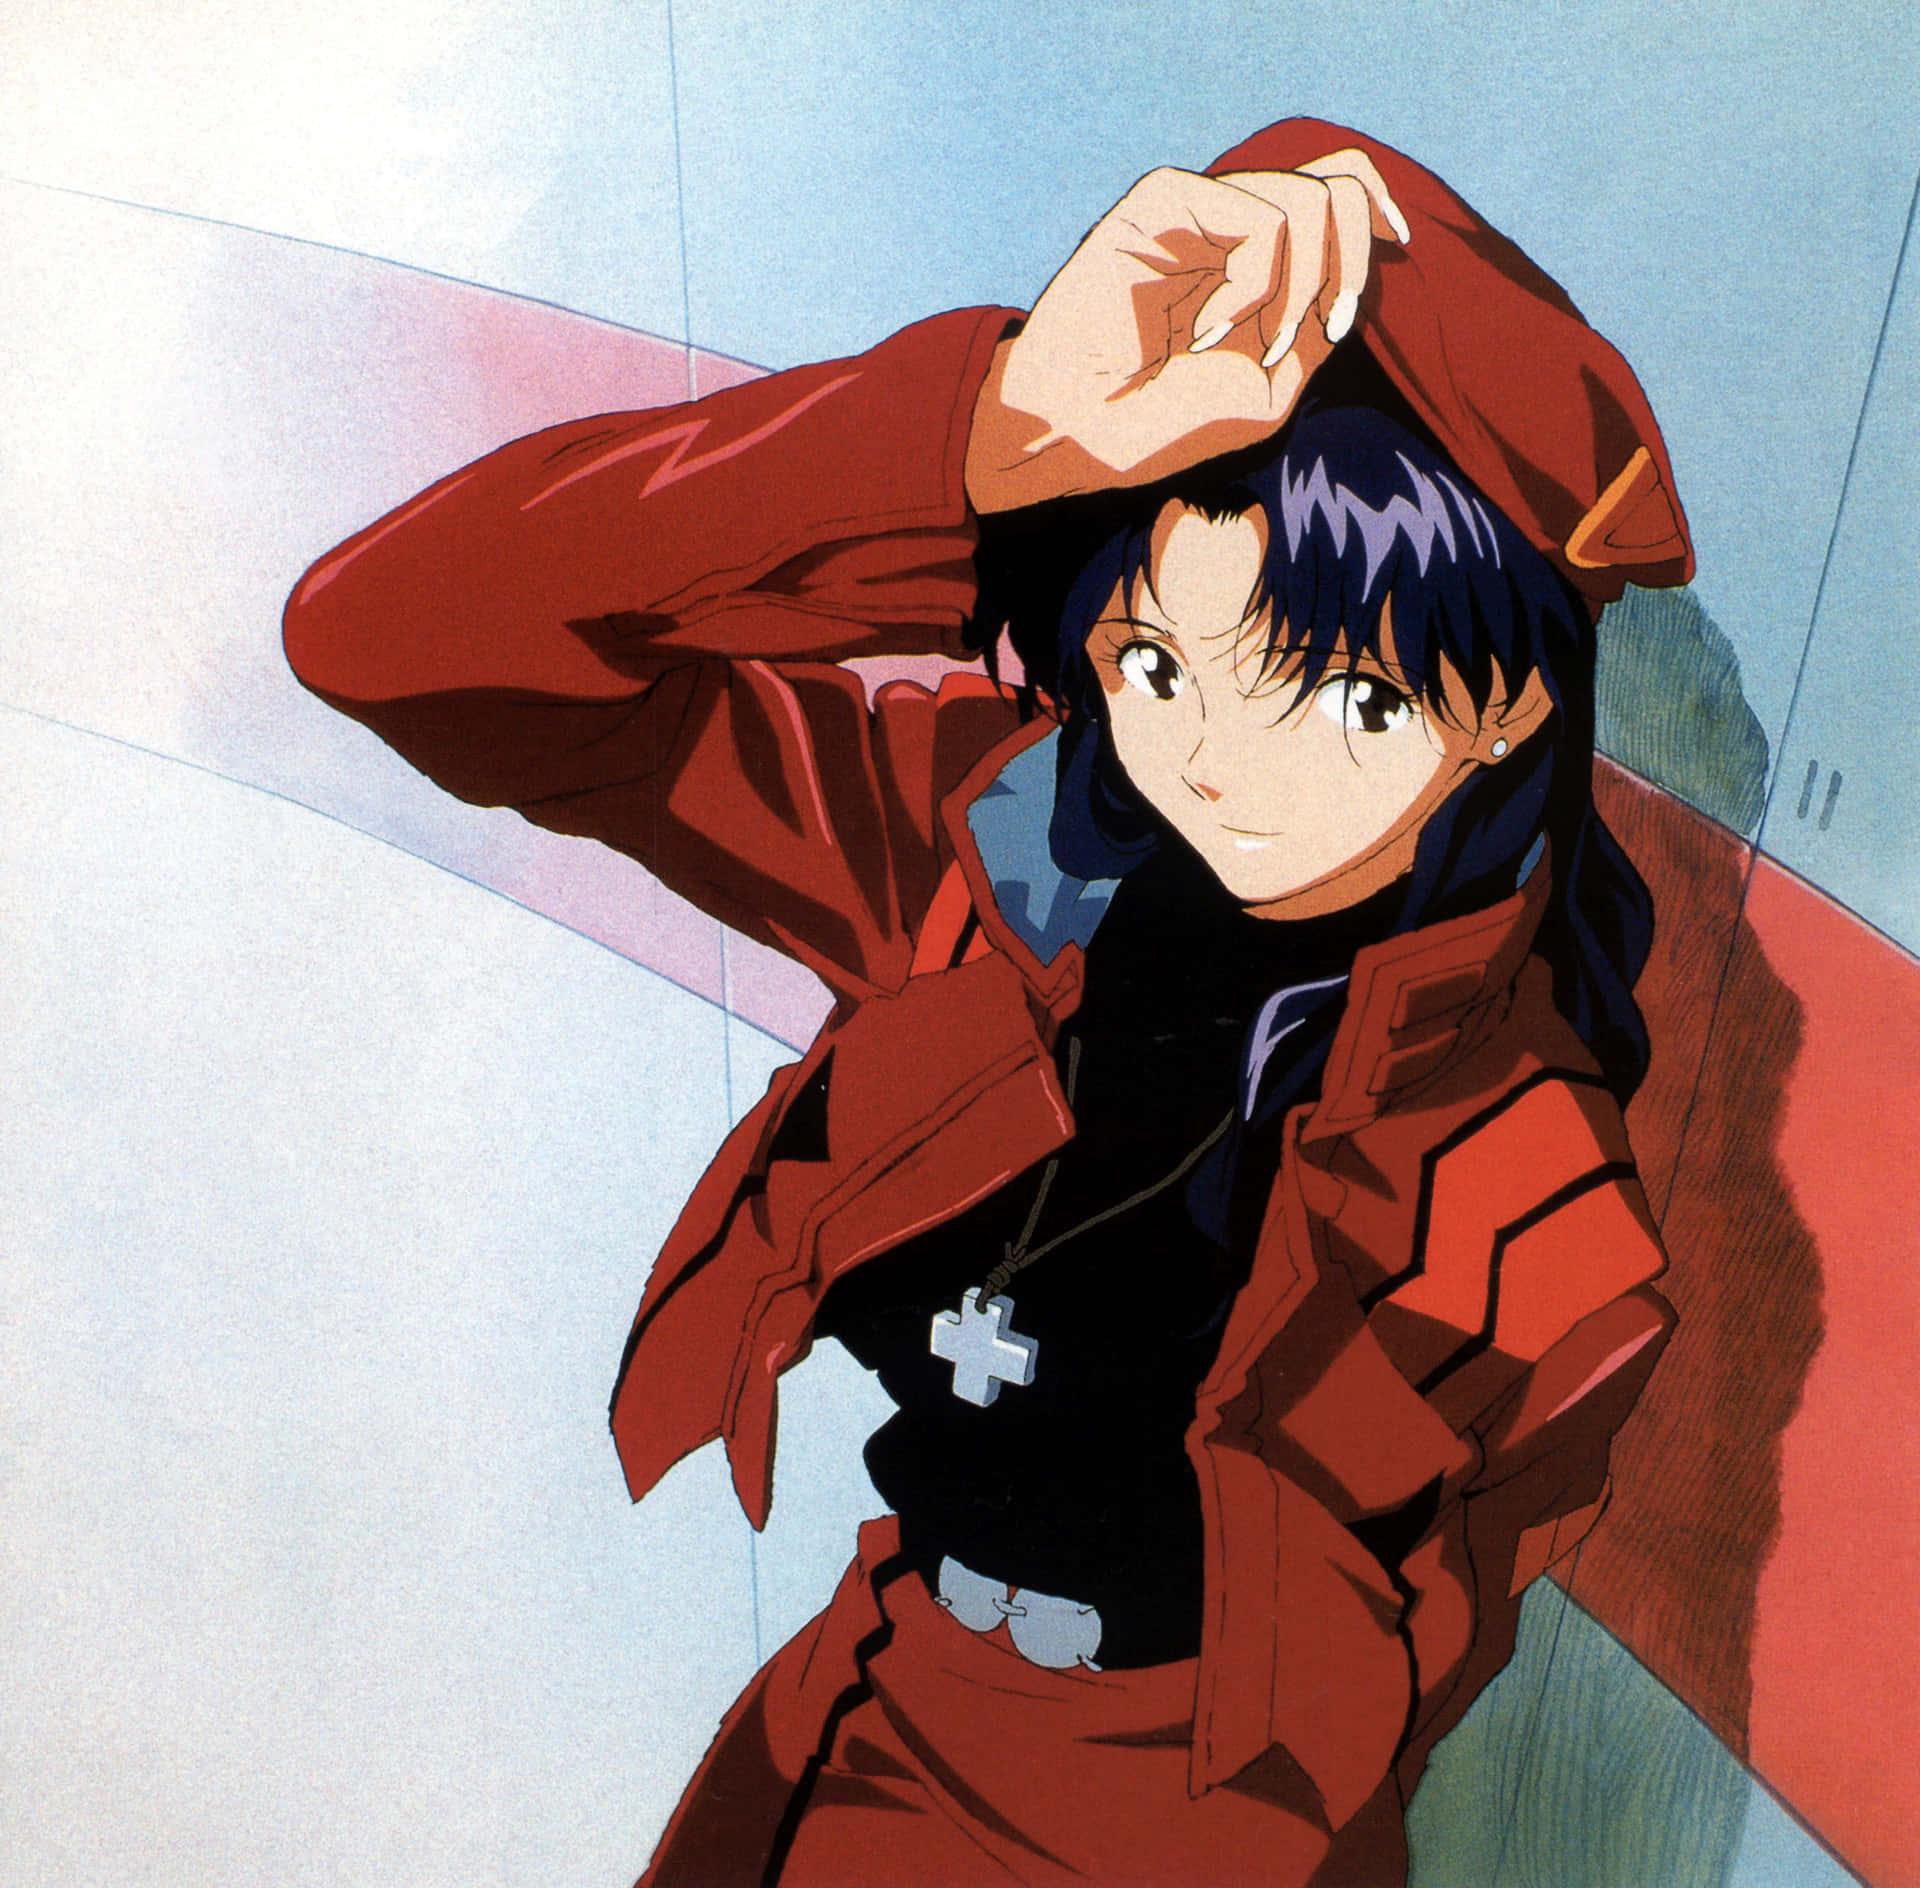 Misato Katsuragi striking a pose in front of an abstract background Wallpaper